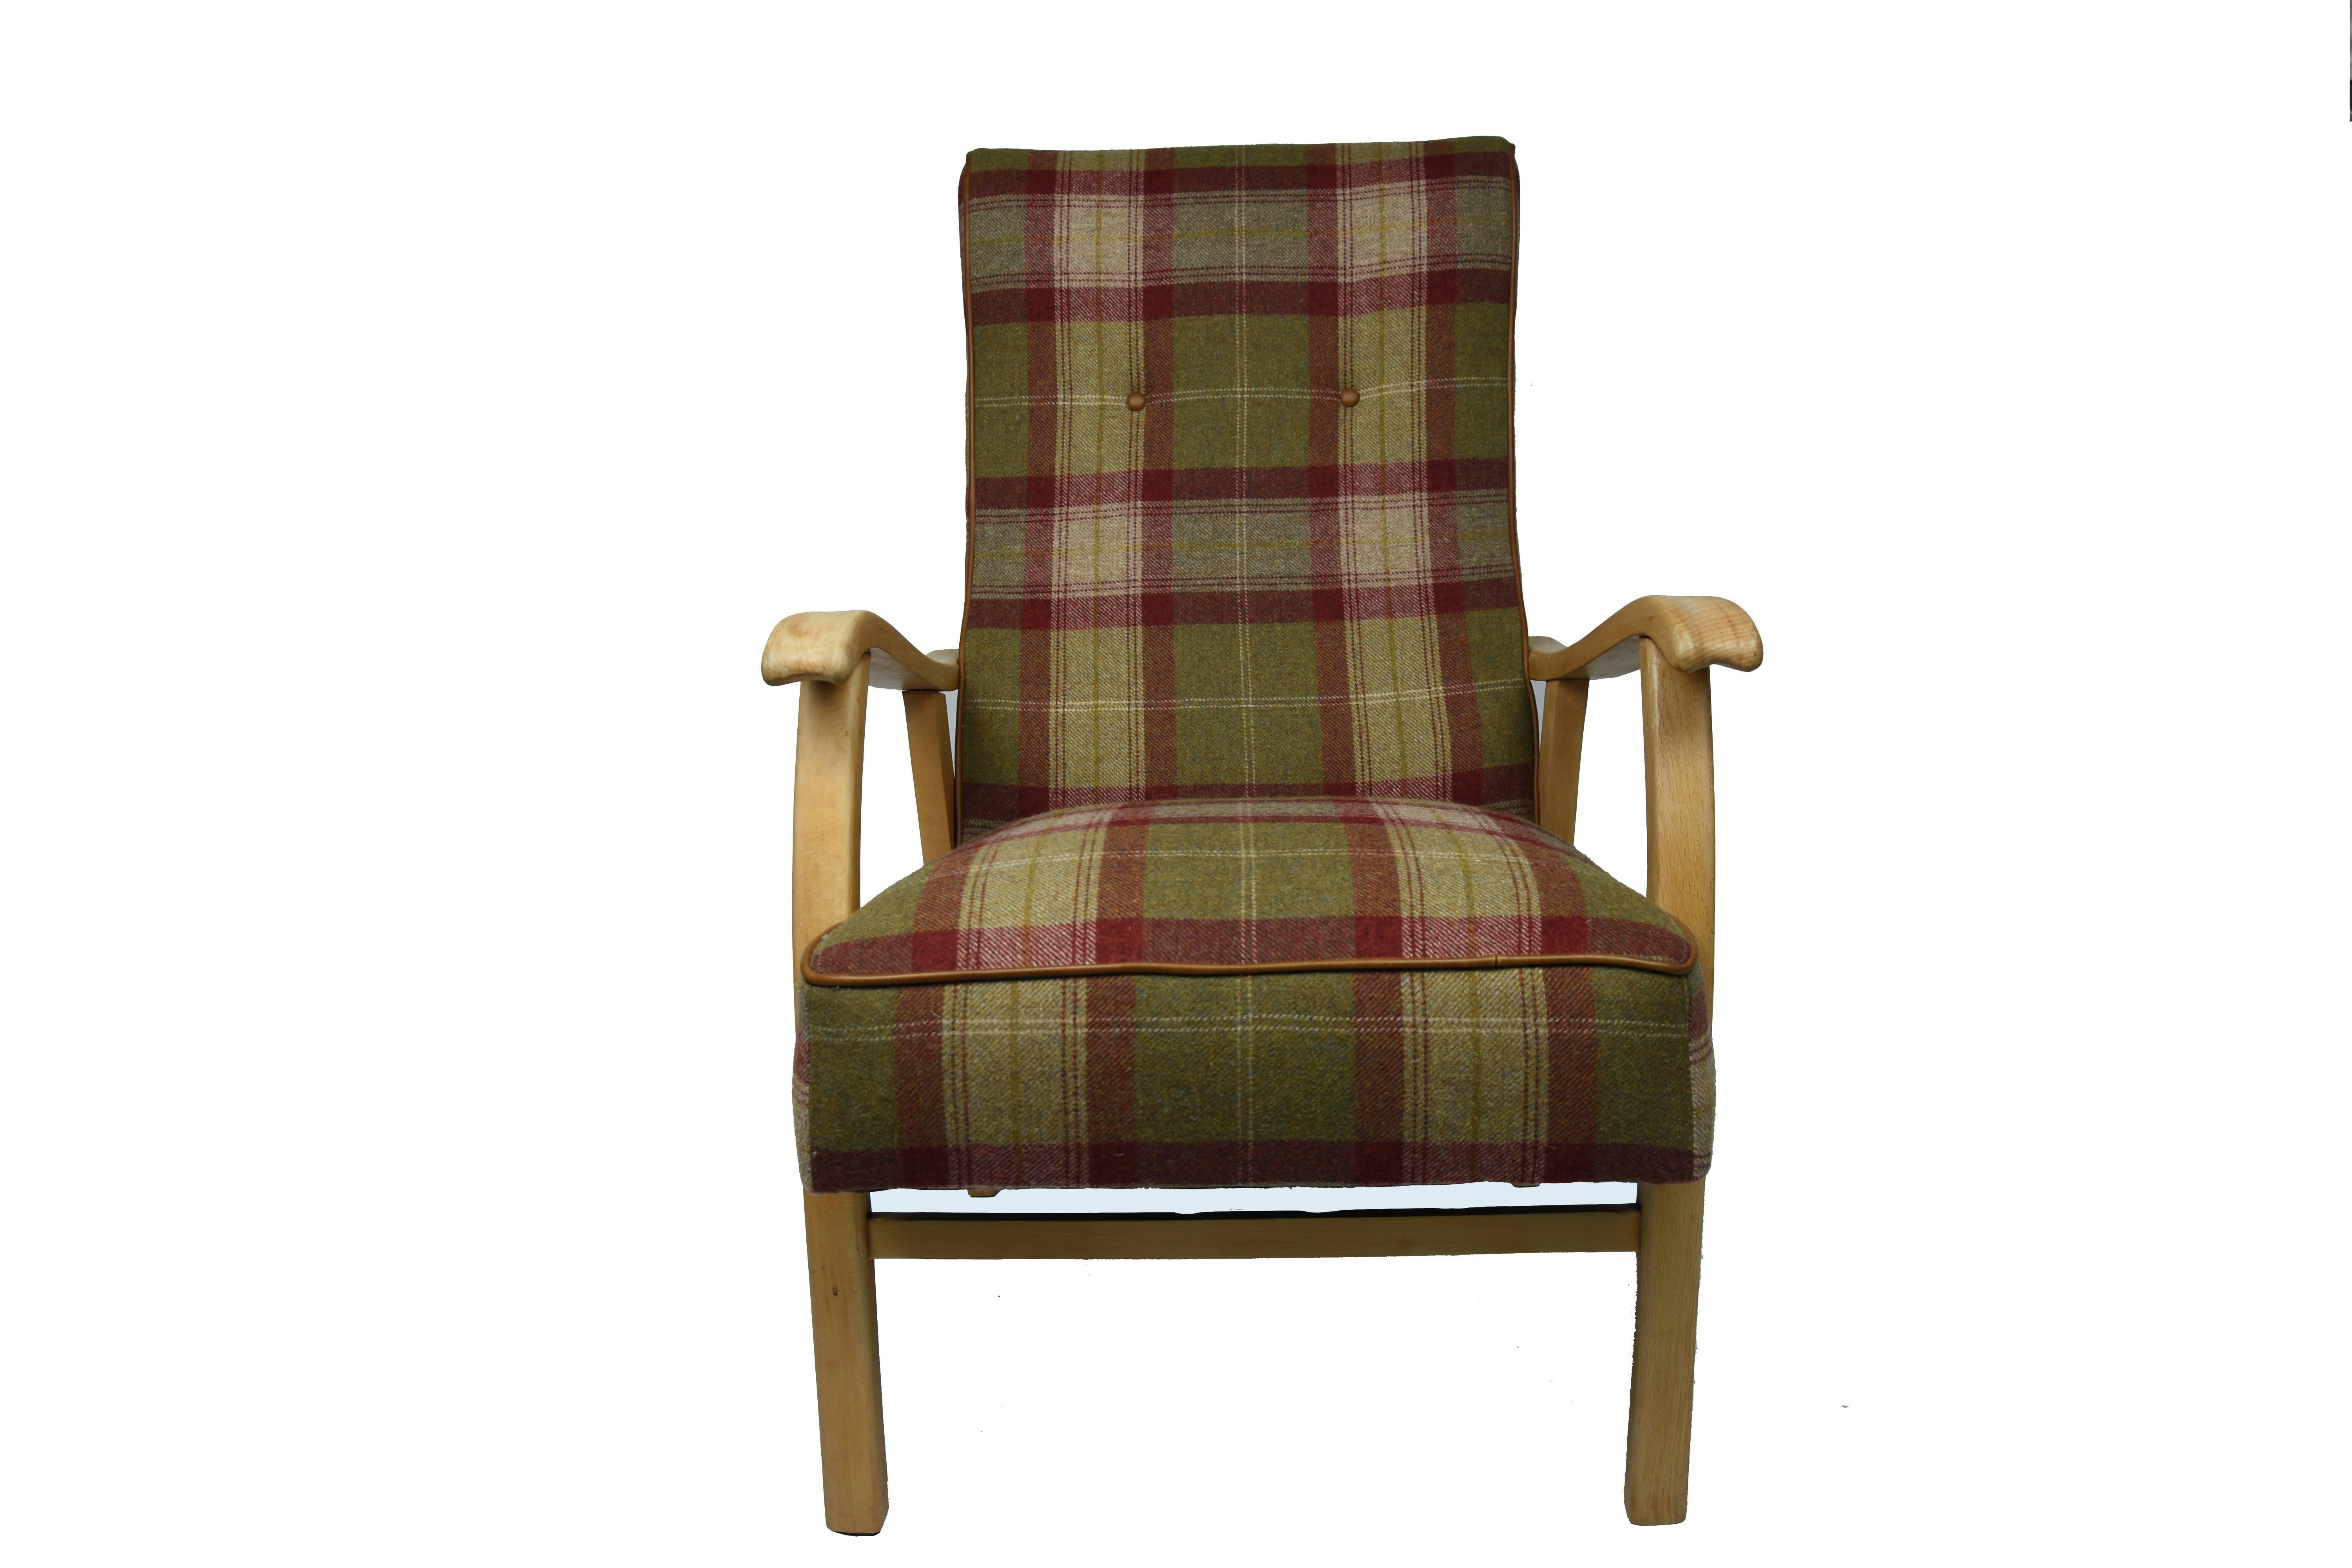 Redesigned and cared to have a unique look, this shabby chic armchair has an immaculate finish. Featuring a beautiful wool check fabric, this elegant piece can transform your home in a lovely place. Fully upholstered using leather piping, its